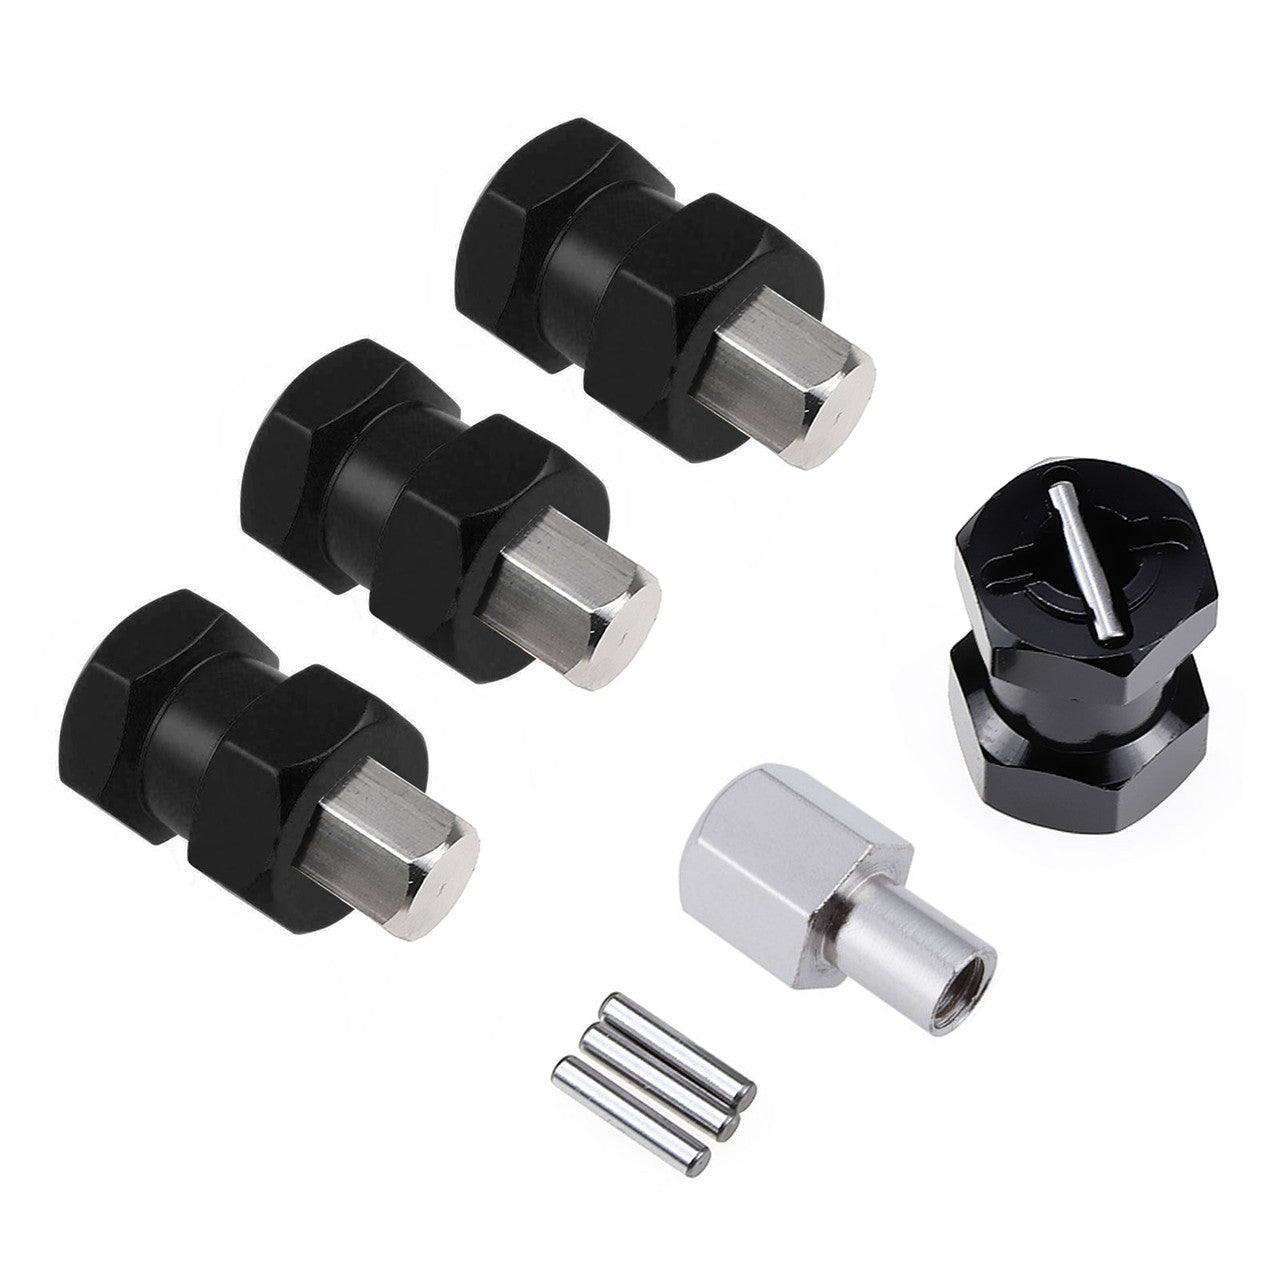 Wheel Hub Hex Drive Adaptor Extension for RC Cars